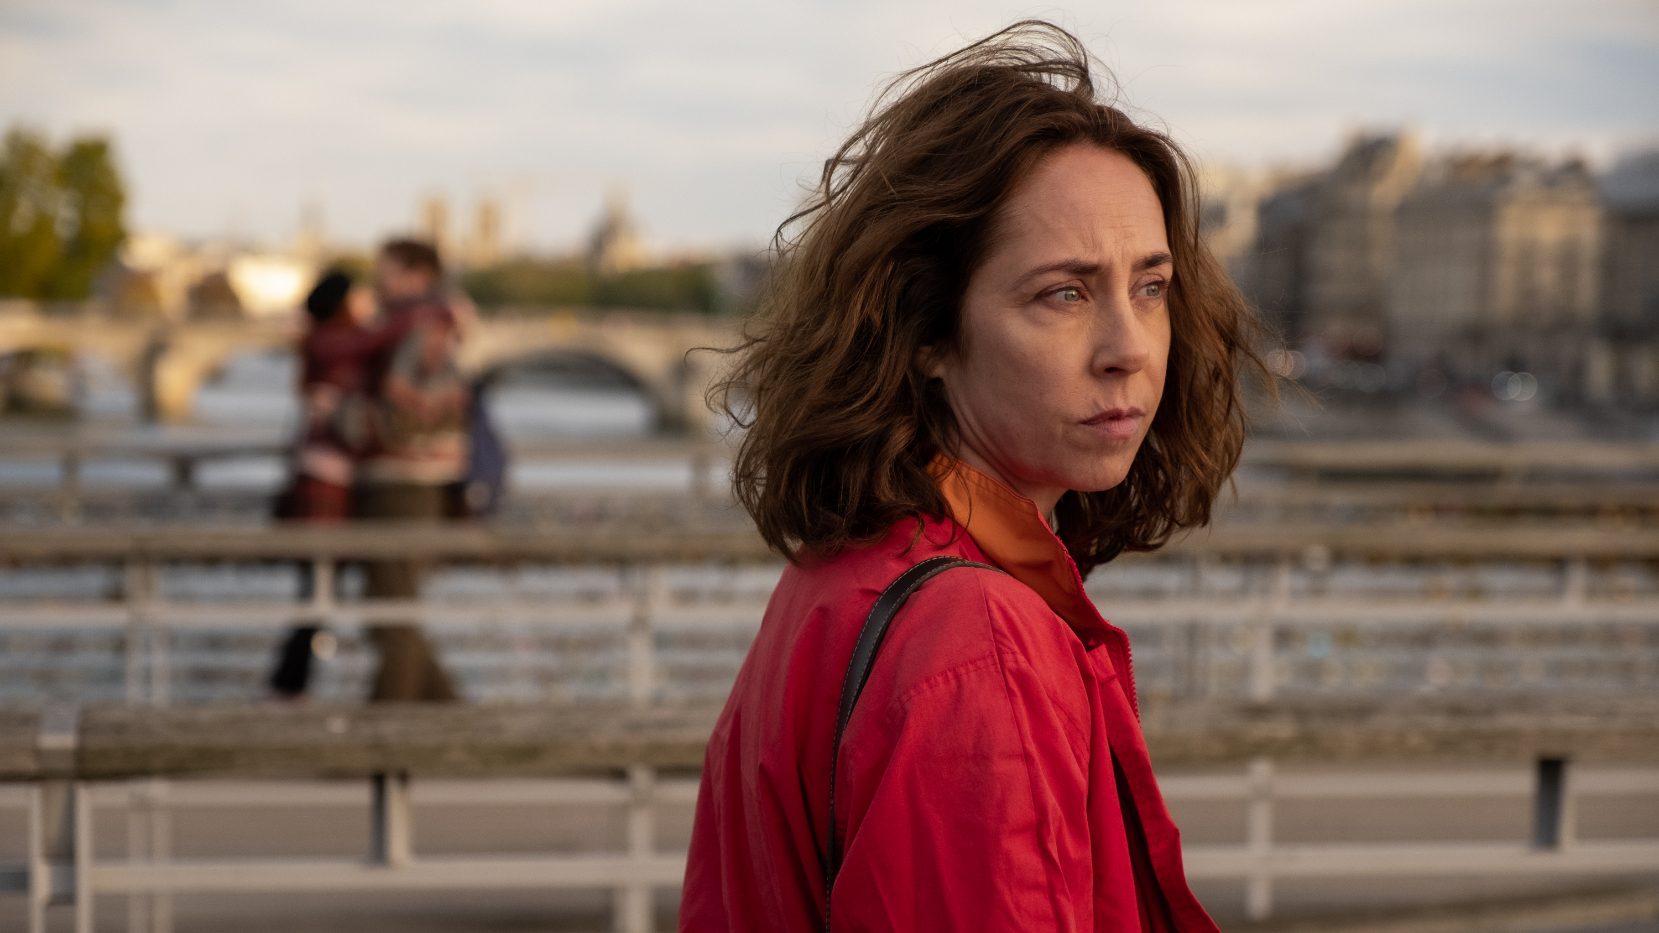 Sofie Gråbøl with Luca Reichardt ben Coker in her new film Rose and, below left, as Sarah Lund in The Killing, the hit Danish series from 2011. Photo: Bulldog Film Distribution